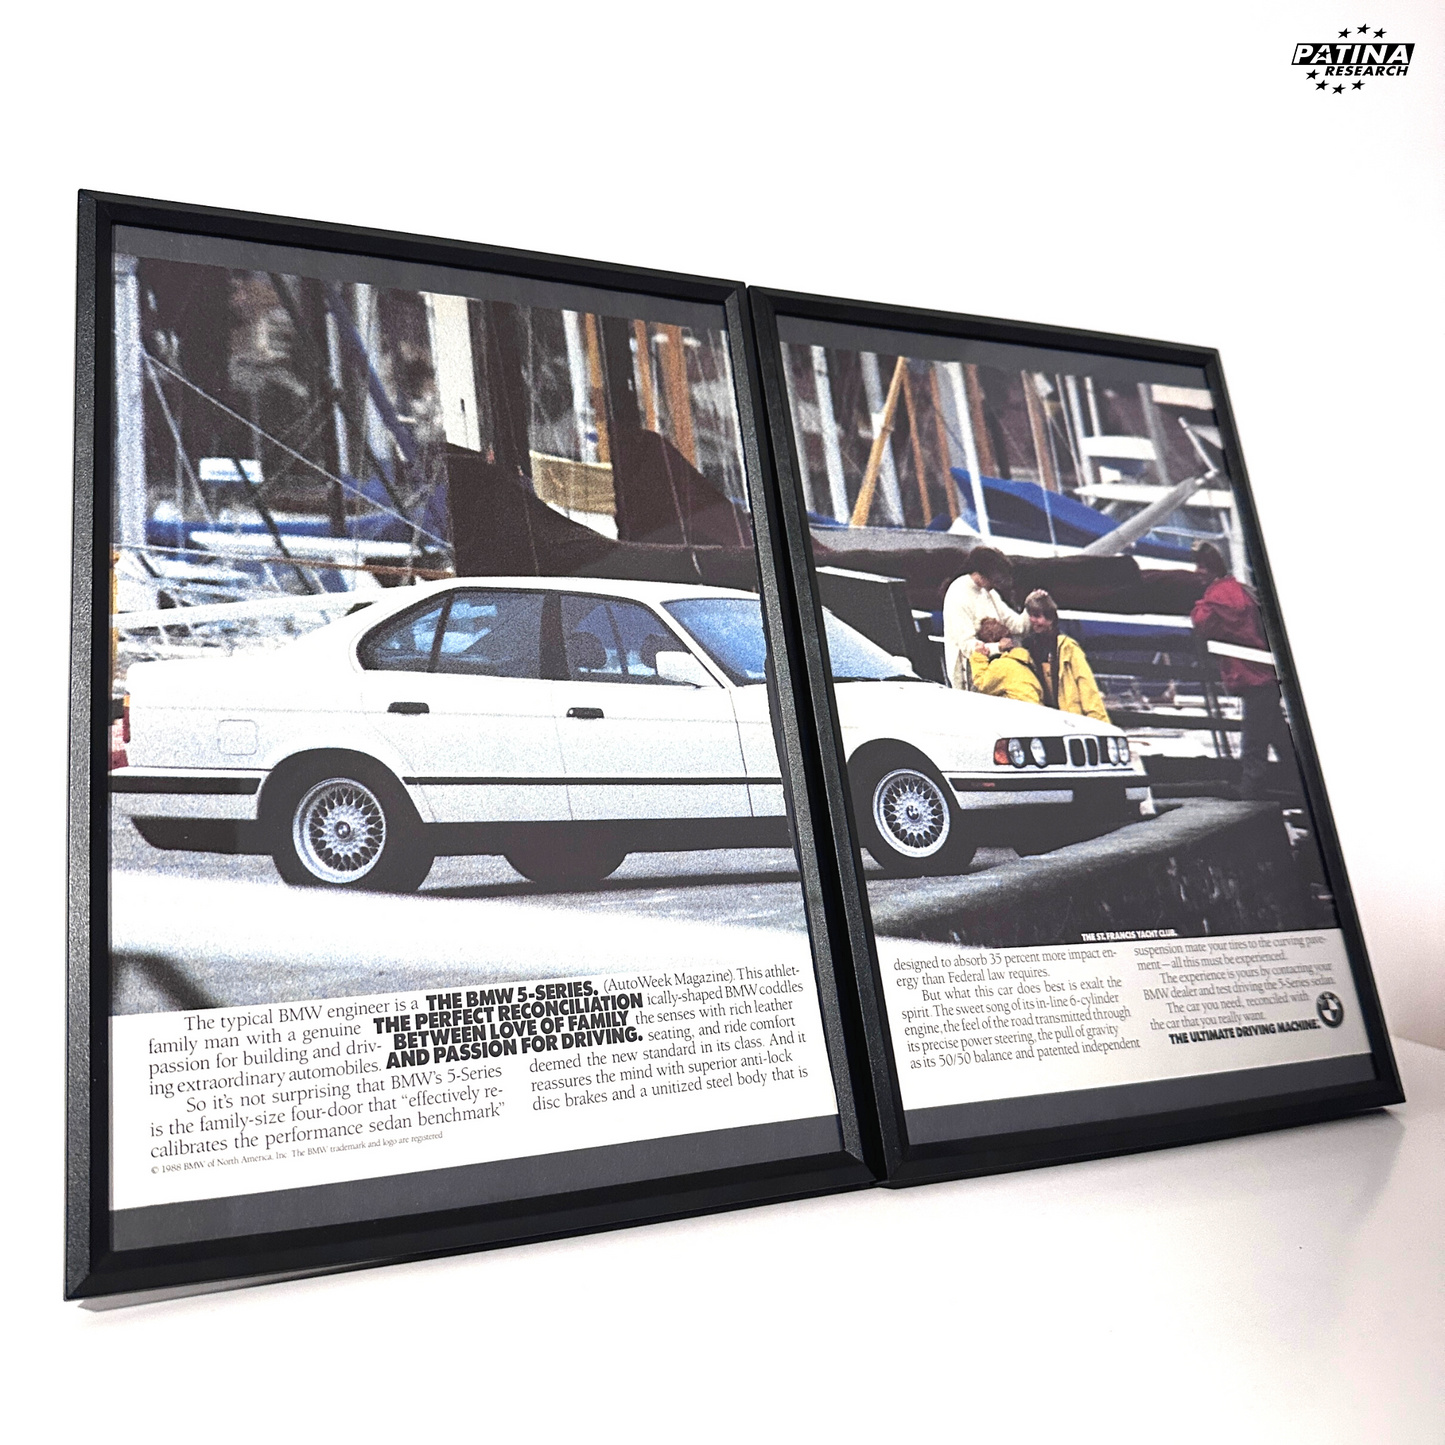 Bmw e34 the perfect reconciliation framed ad